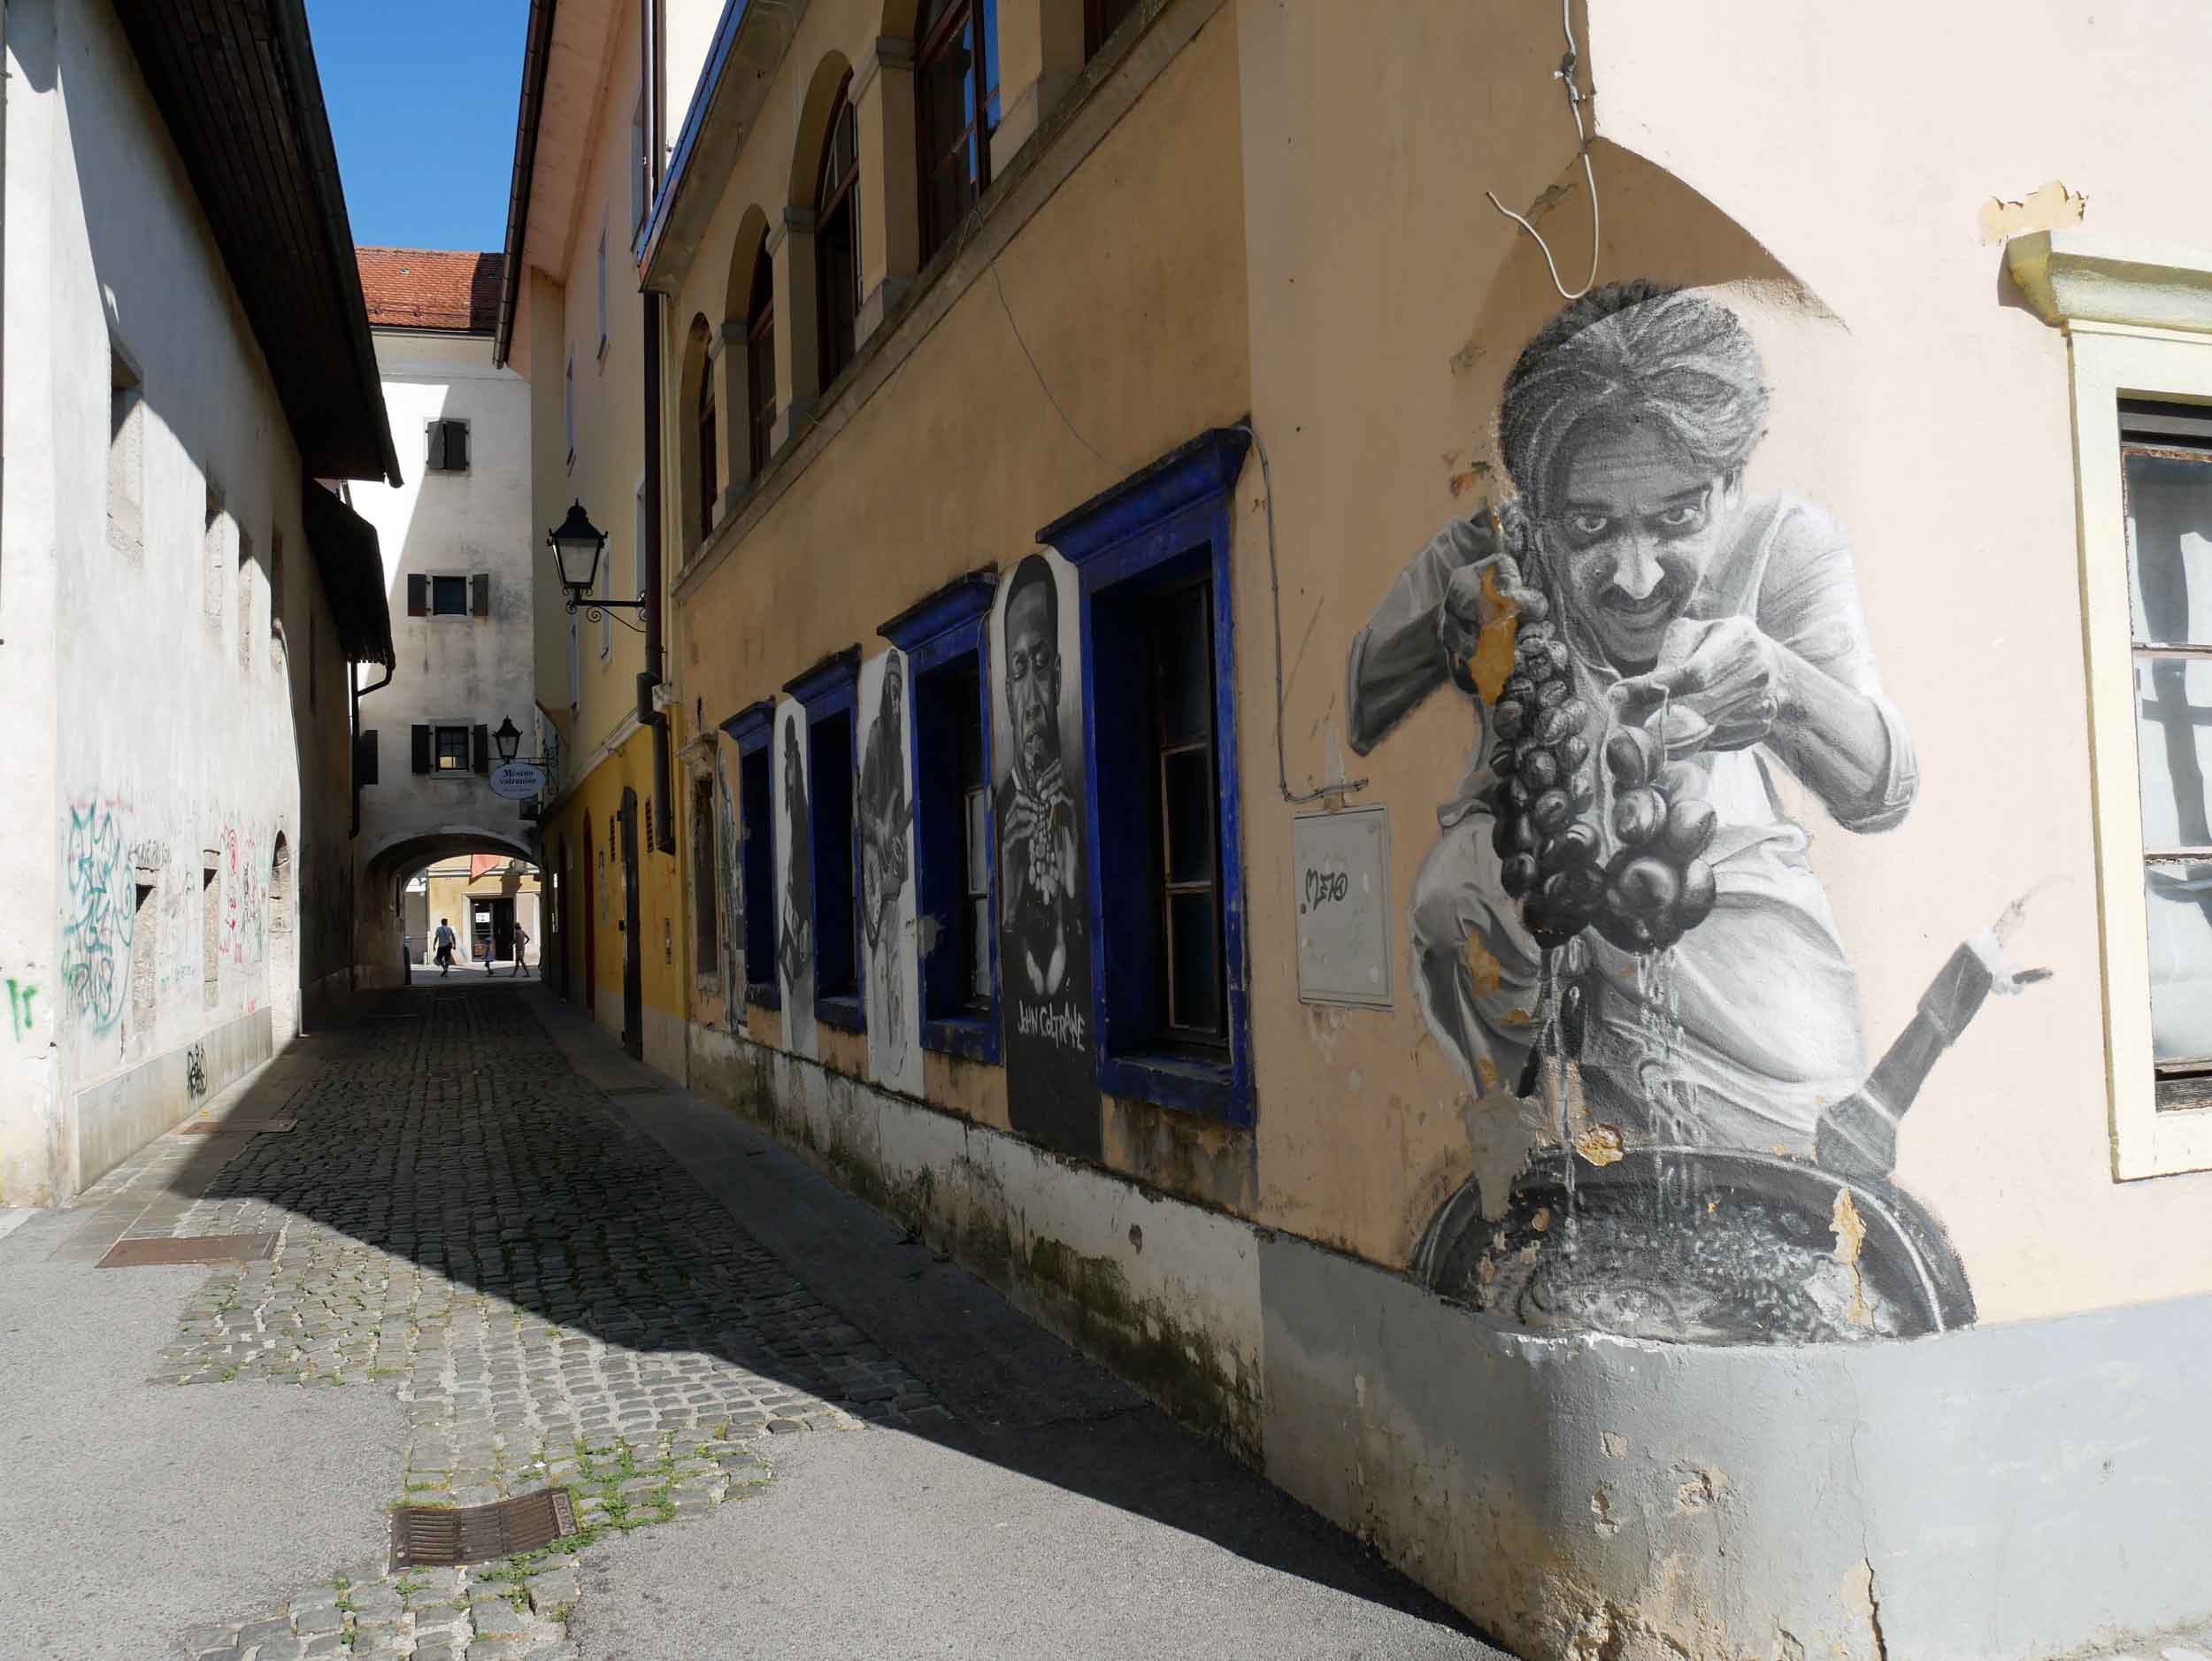  Just outside of the country's capital city, Kranj offered an alternative artsy side with street art, galleries and boutique shops.&nbsp; 